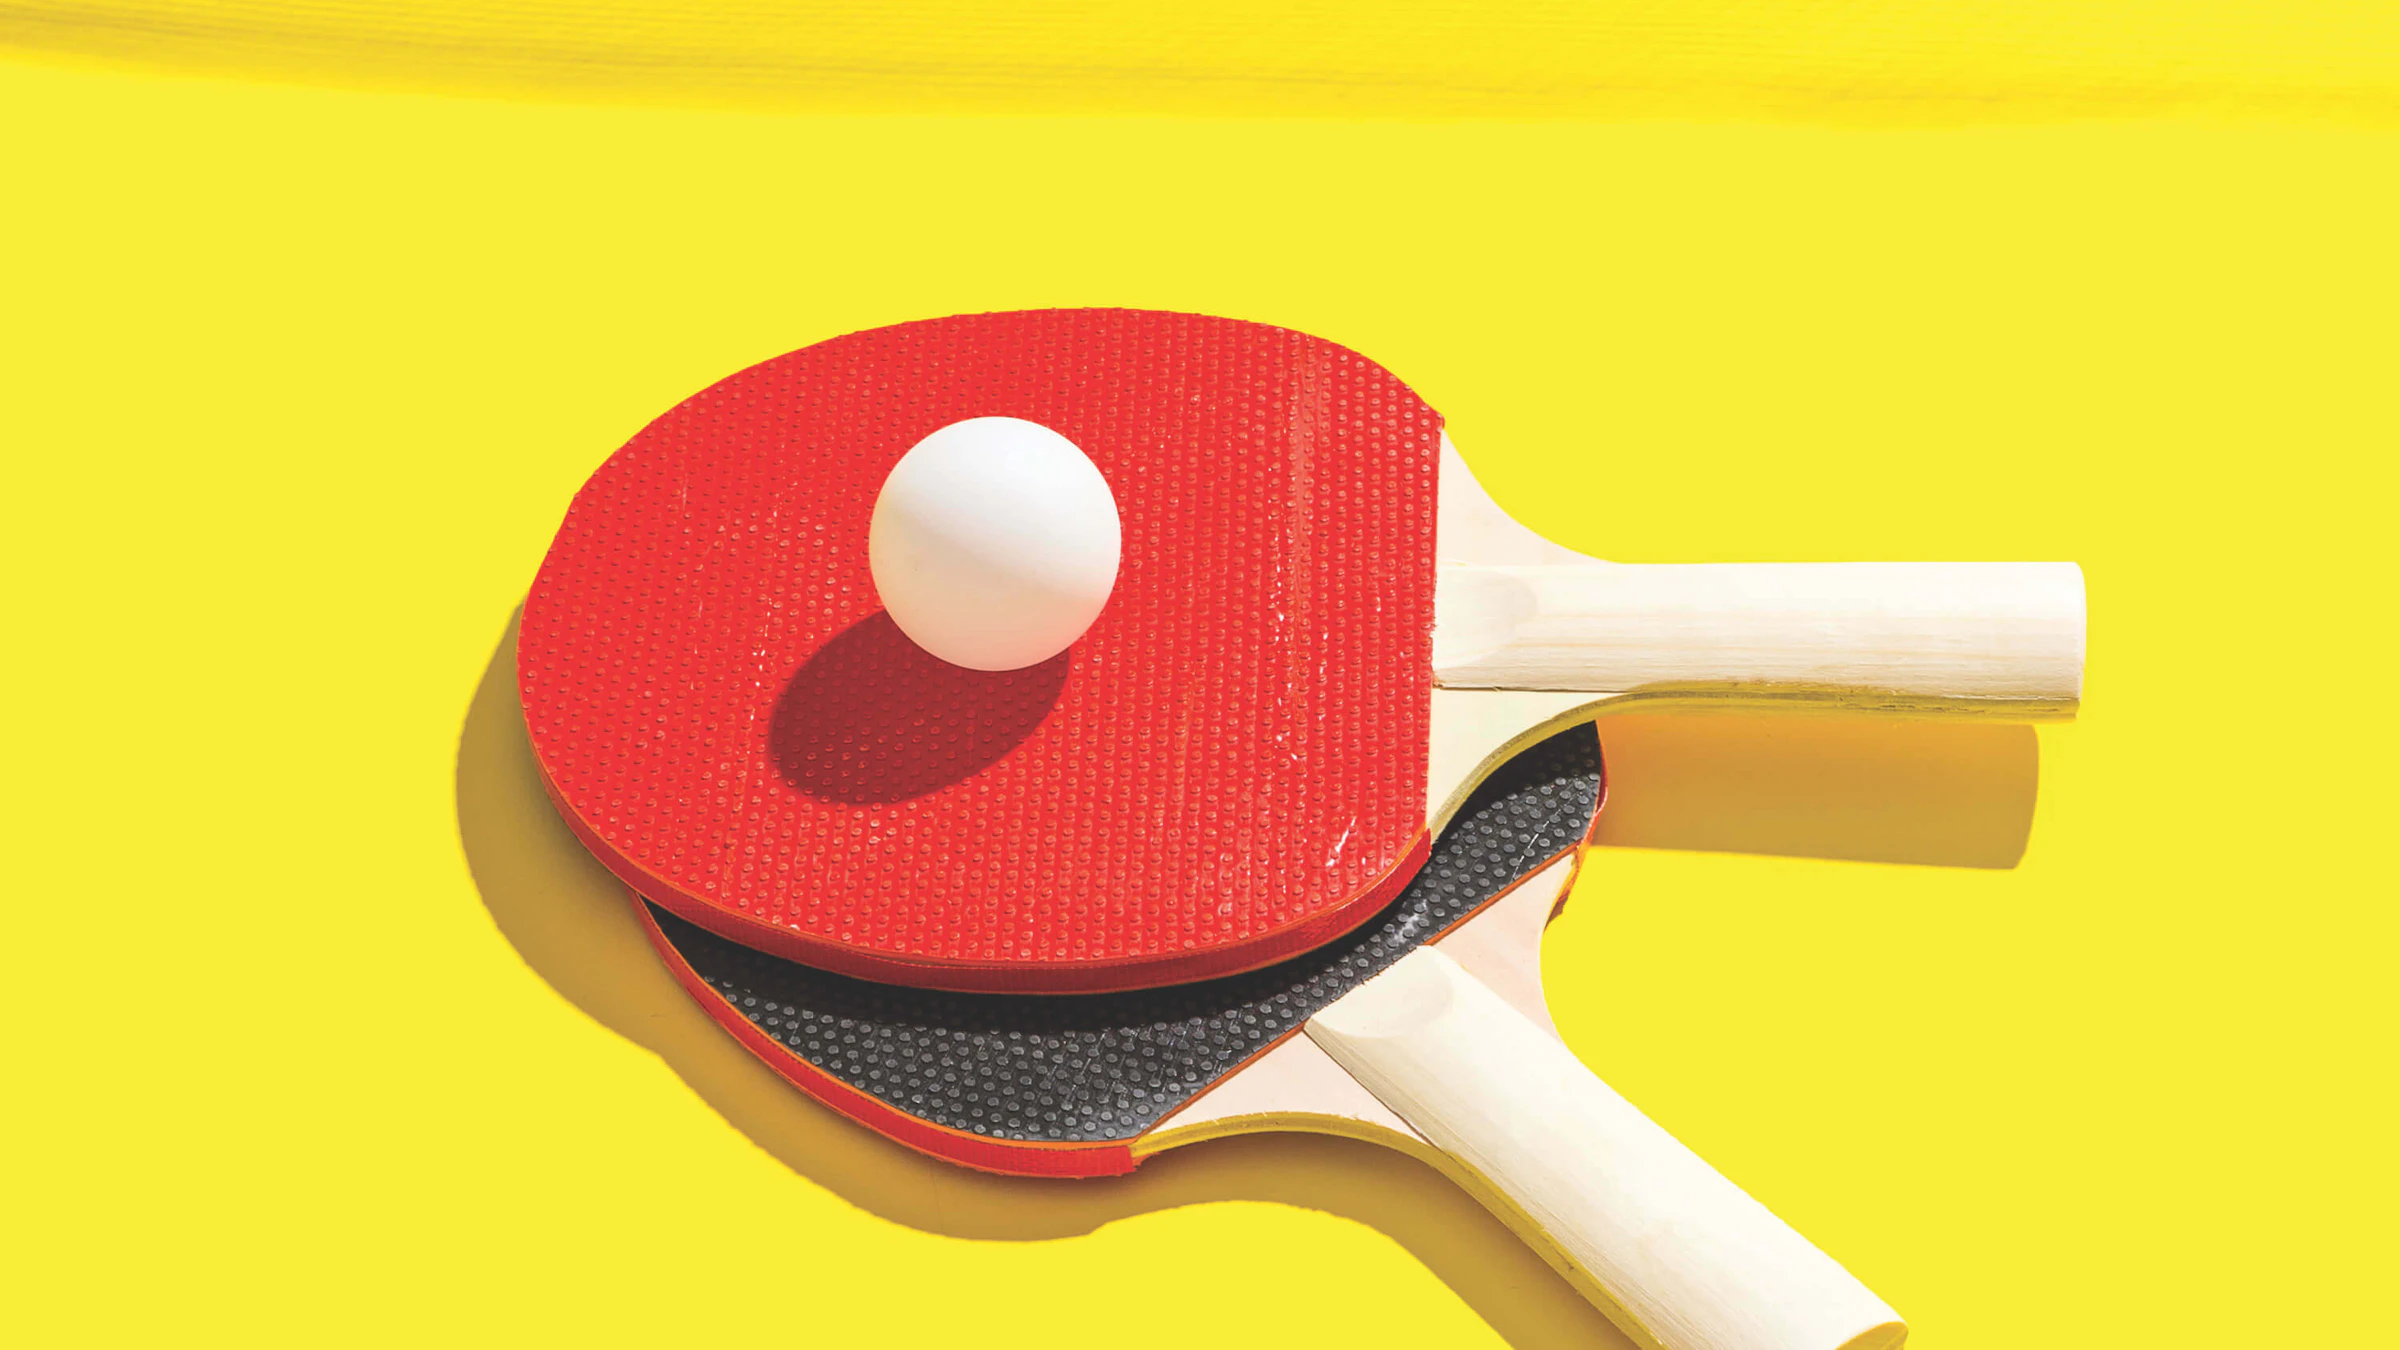 Table Tennis Paddles and Ball Active Adult Lifestyle Community